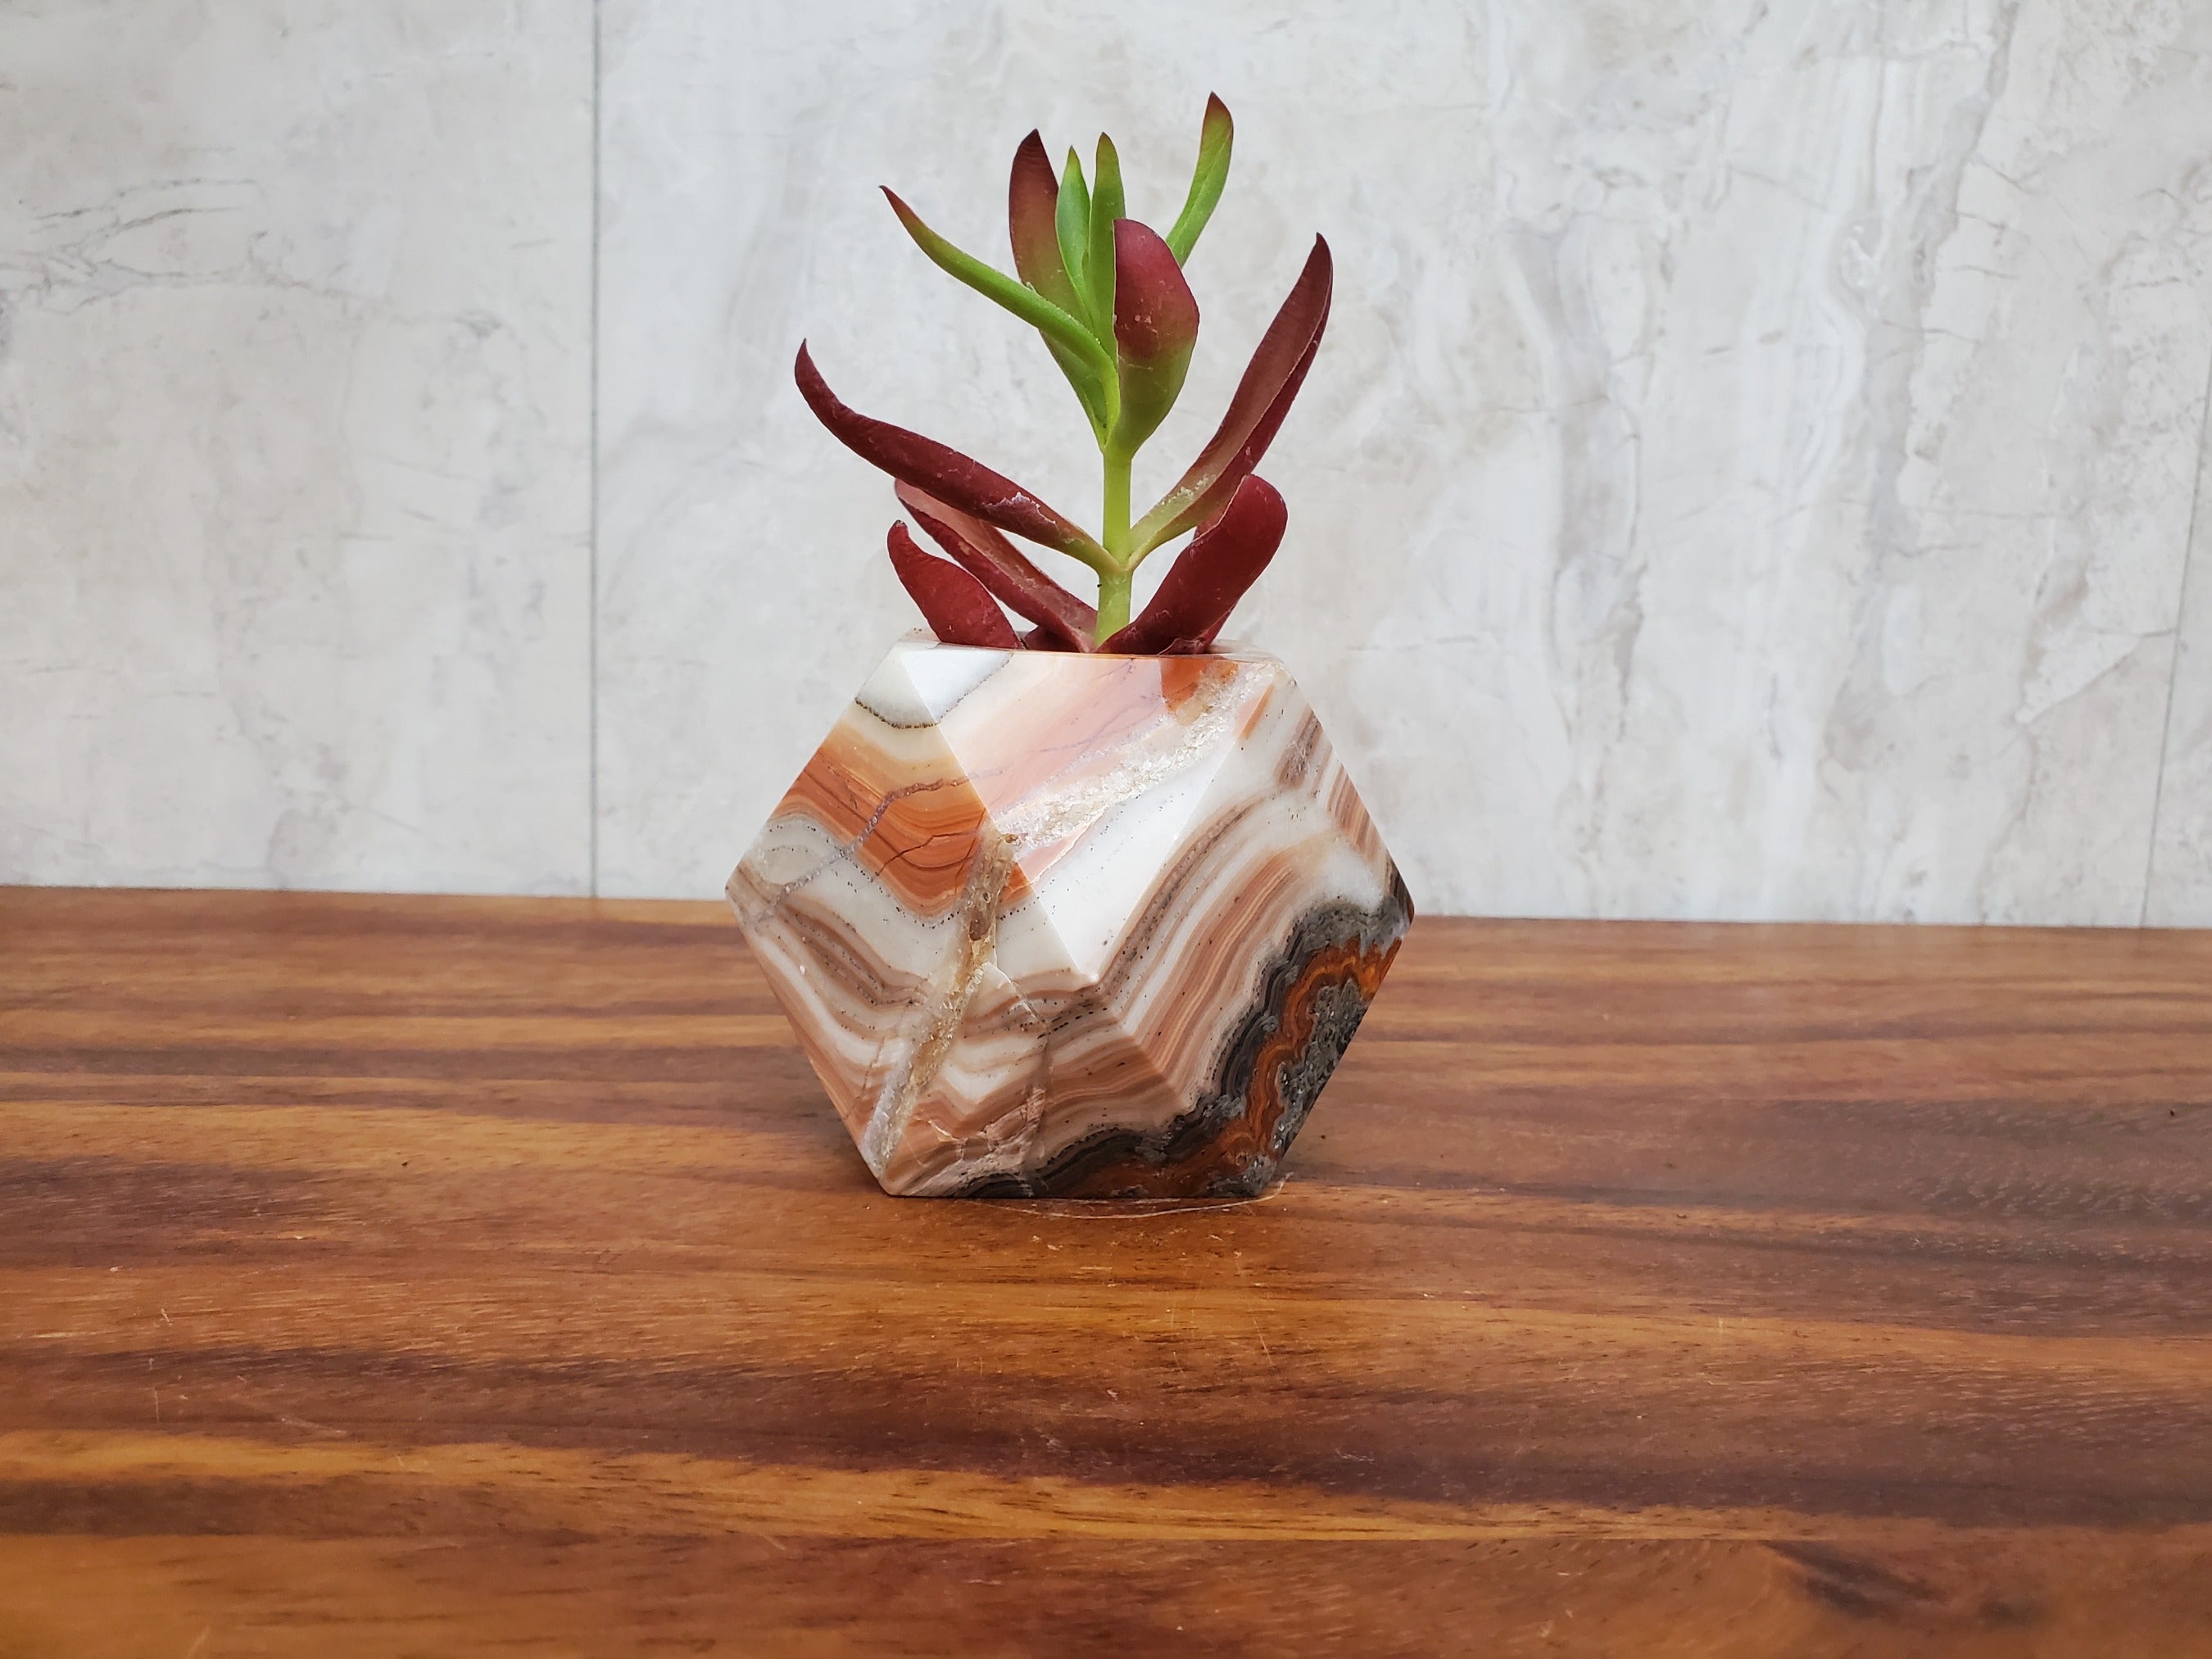 Red, White, and Gray Onyx Stone Geometric Mini Planter for Succulents and Terrariums. Handmade in Mexico. We ship and package from the USA. Buy now at www.felipeandgrace.com.